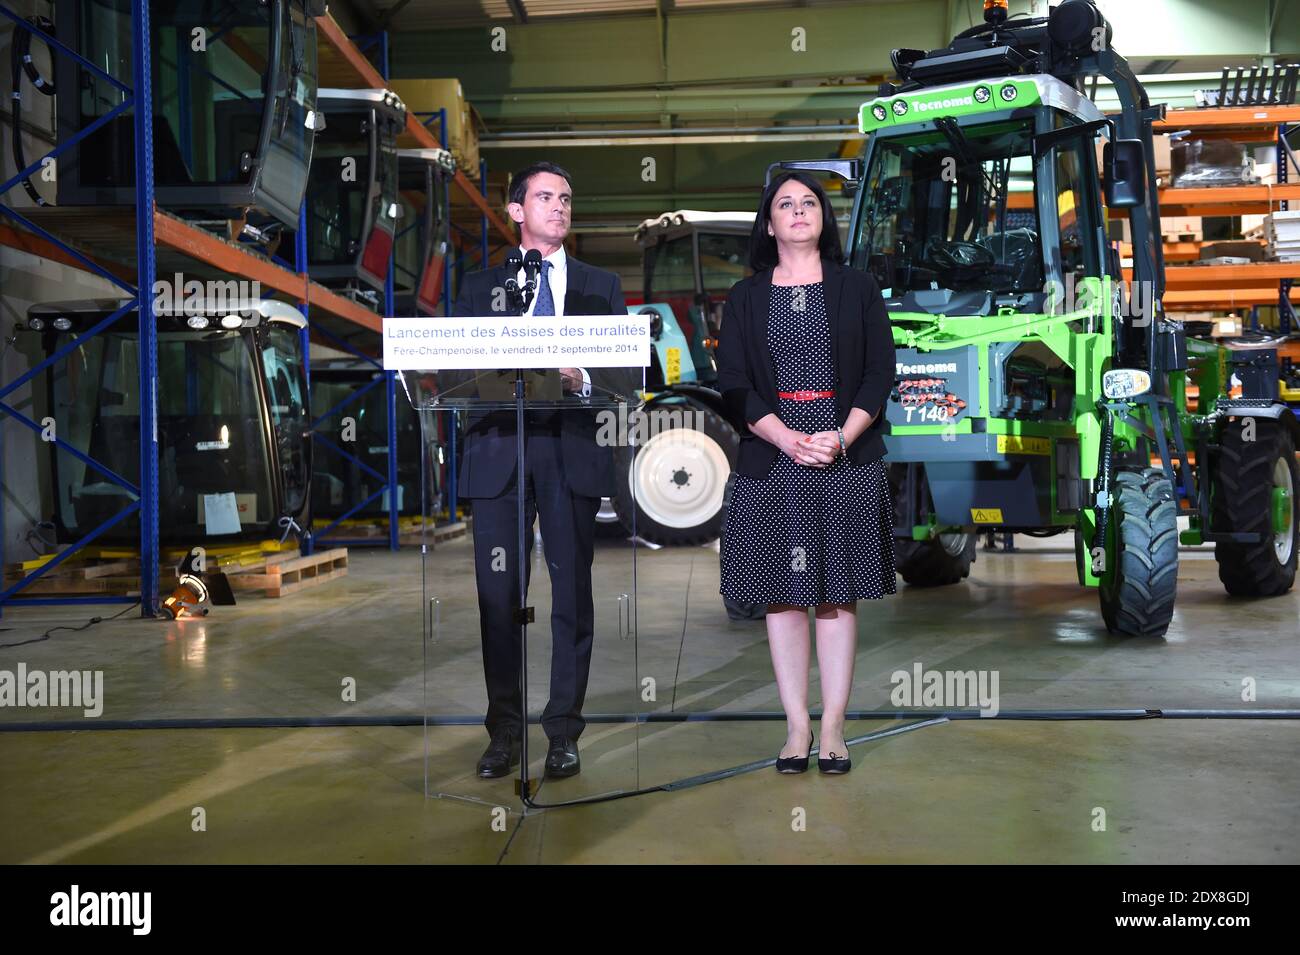 French Prime minister Manuel Valls and French Minister for Housing, Territorial Equality and Rurality Sylvia Pinel visit a 'preciculture' plant, which makes tractors, on September 12, 2014 in Fere Champenoise, France. Photo by Nicolas Gouhier/ABACAPRESS.COM Stock Photo